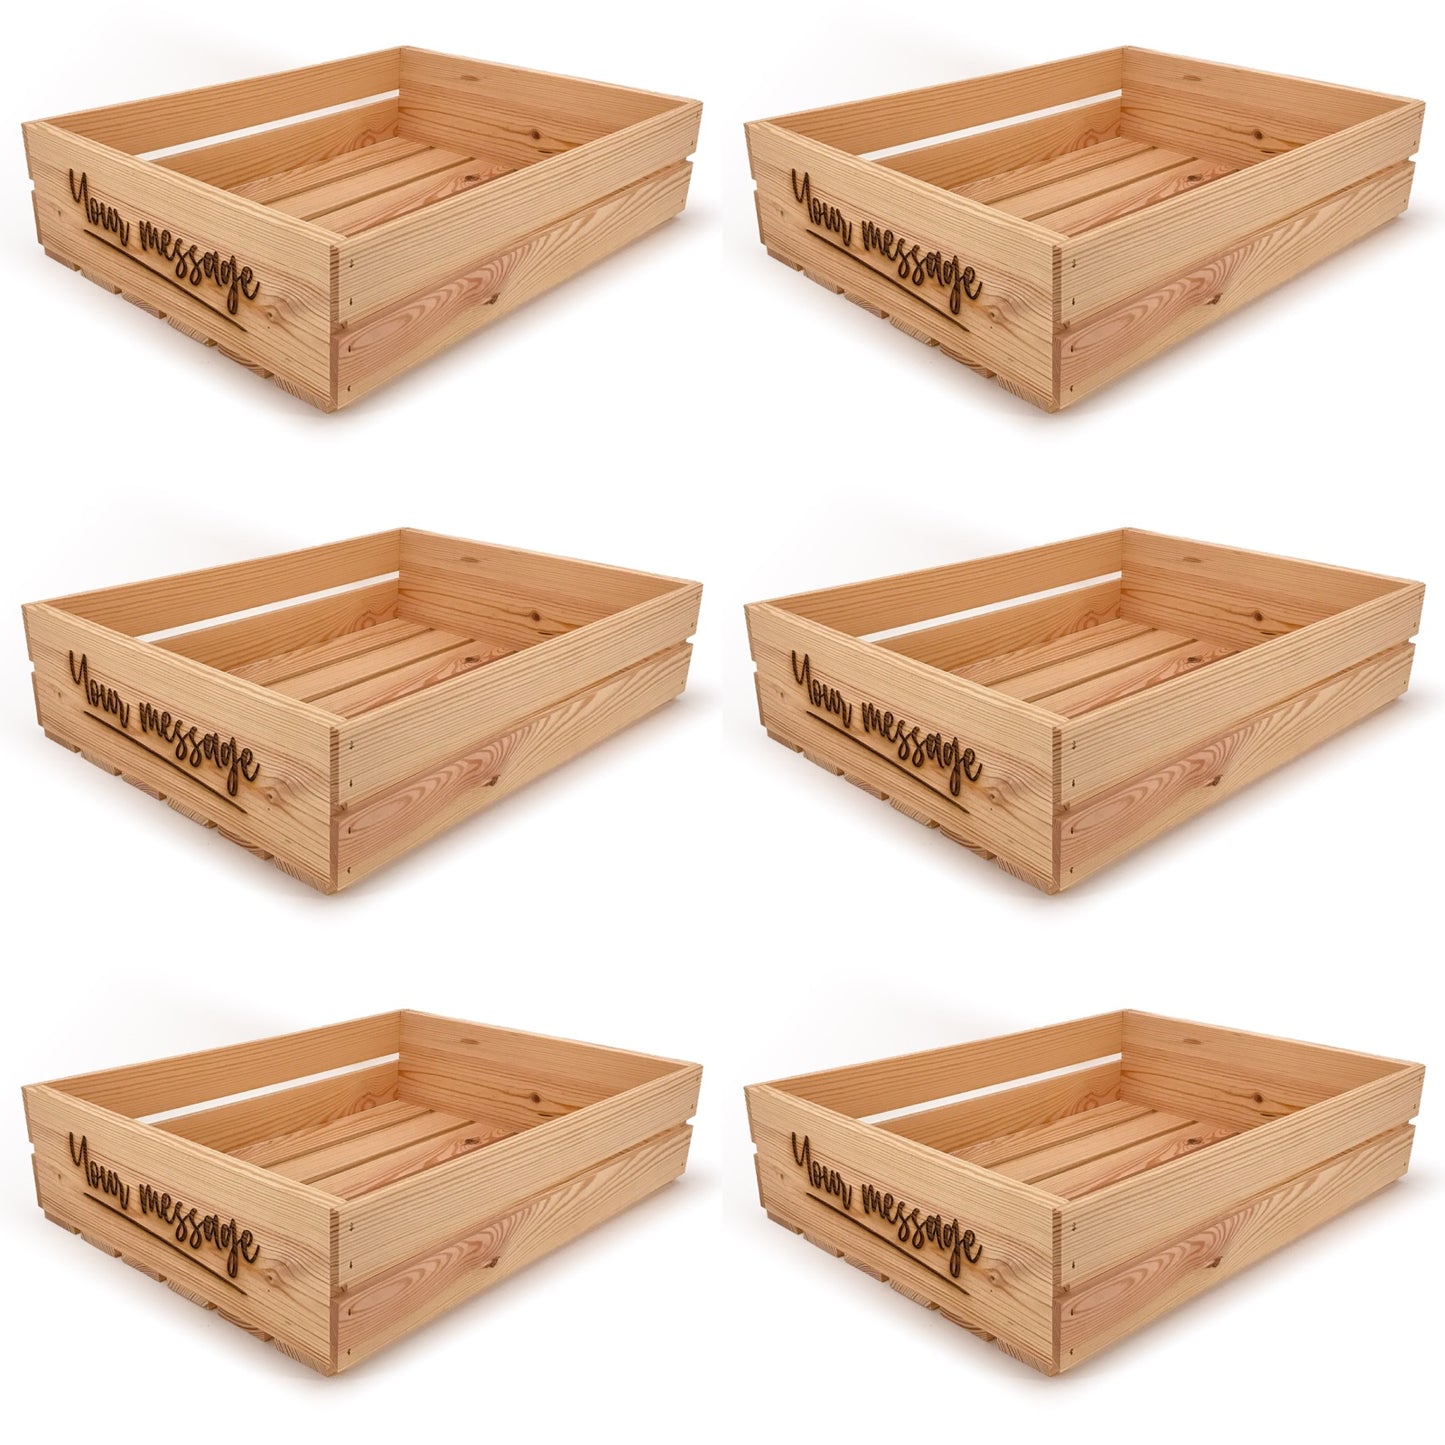 6 Small wooden crates with custom message 22x17x5.25